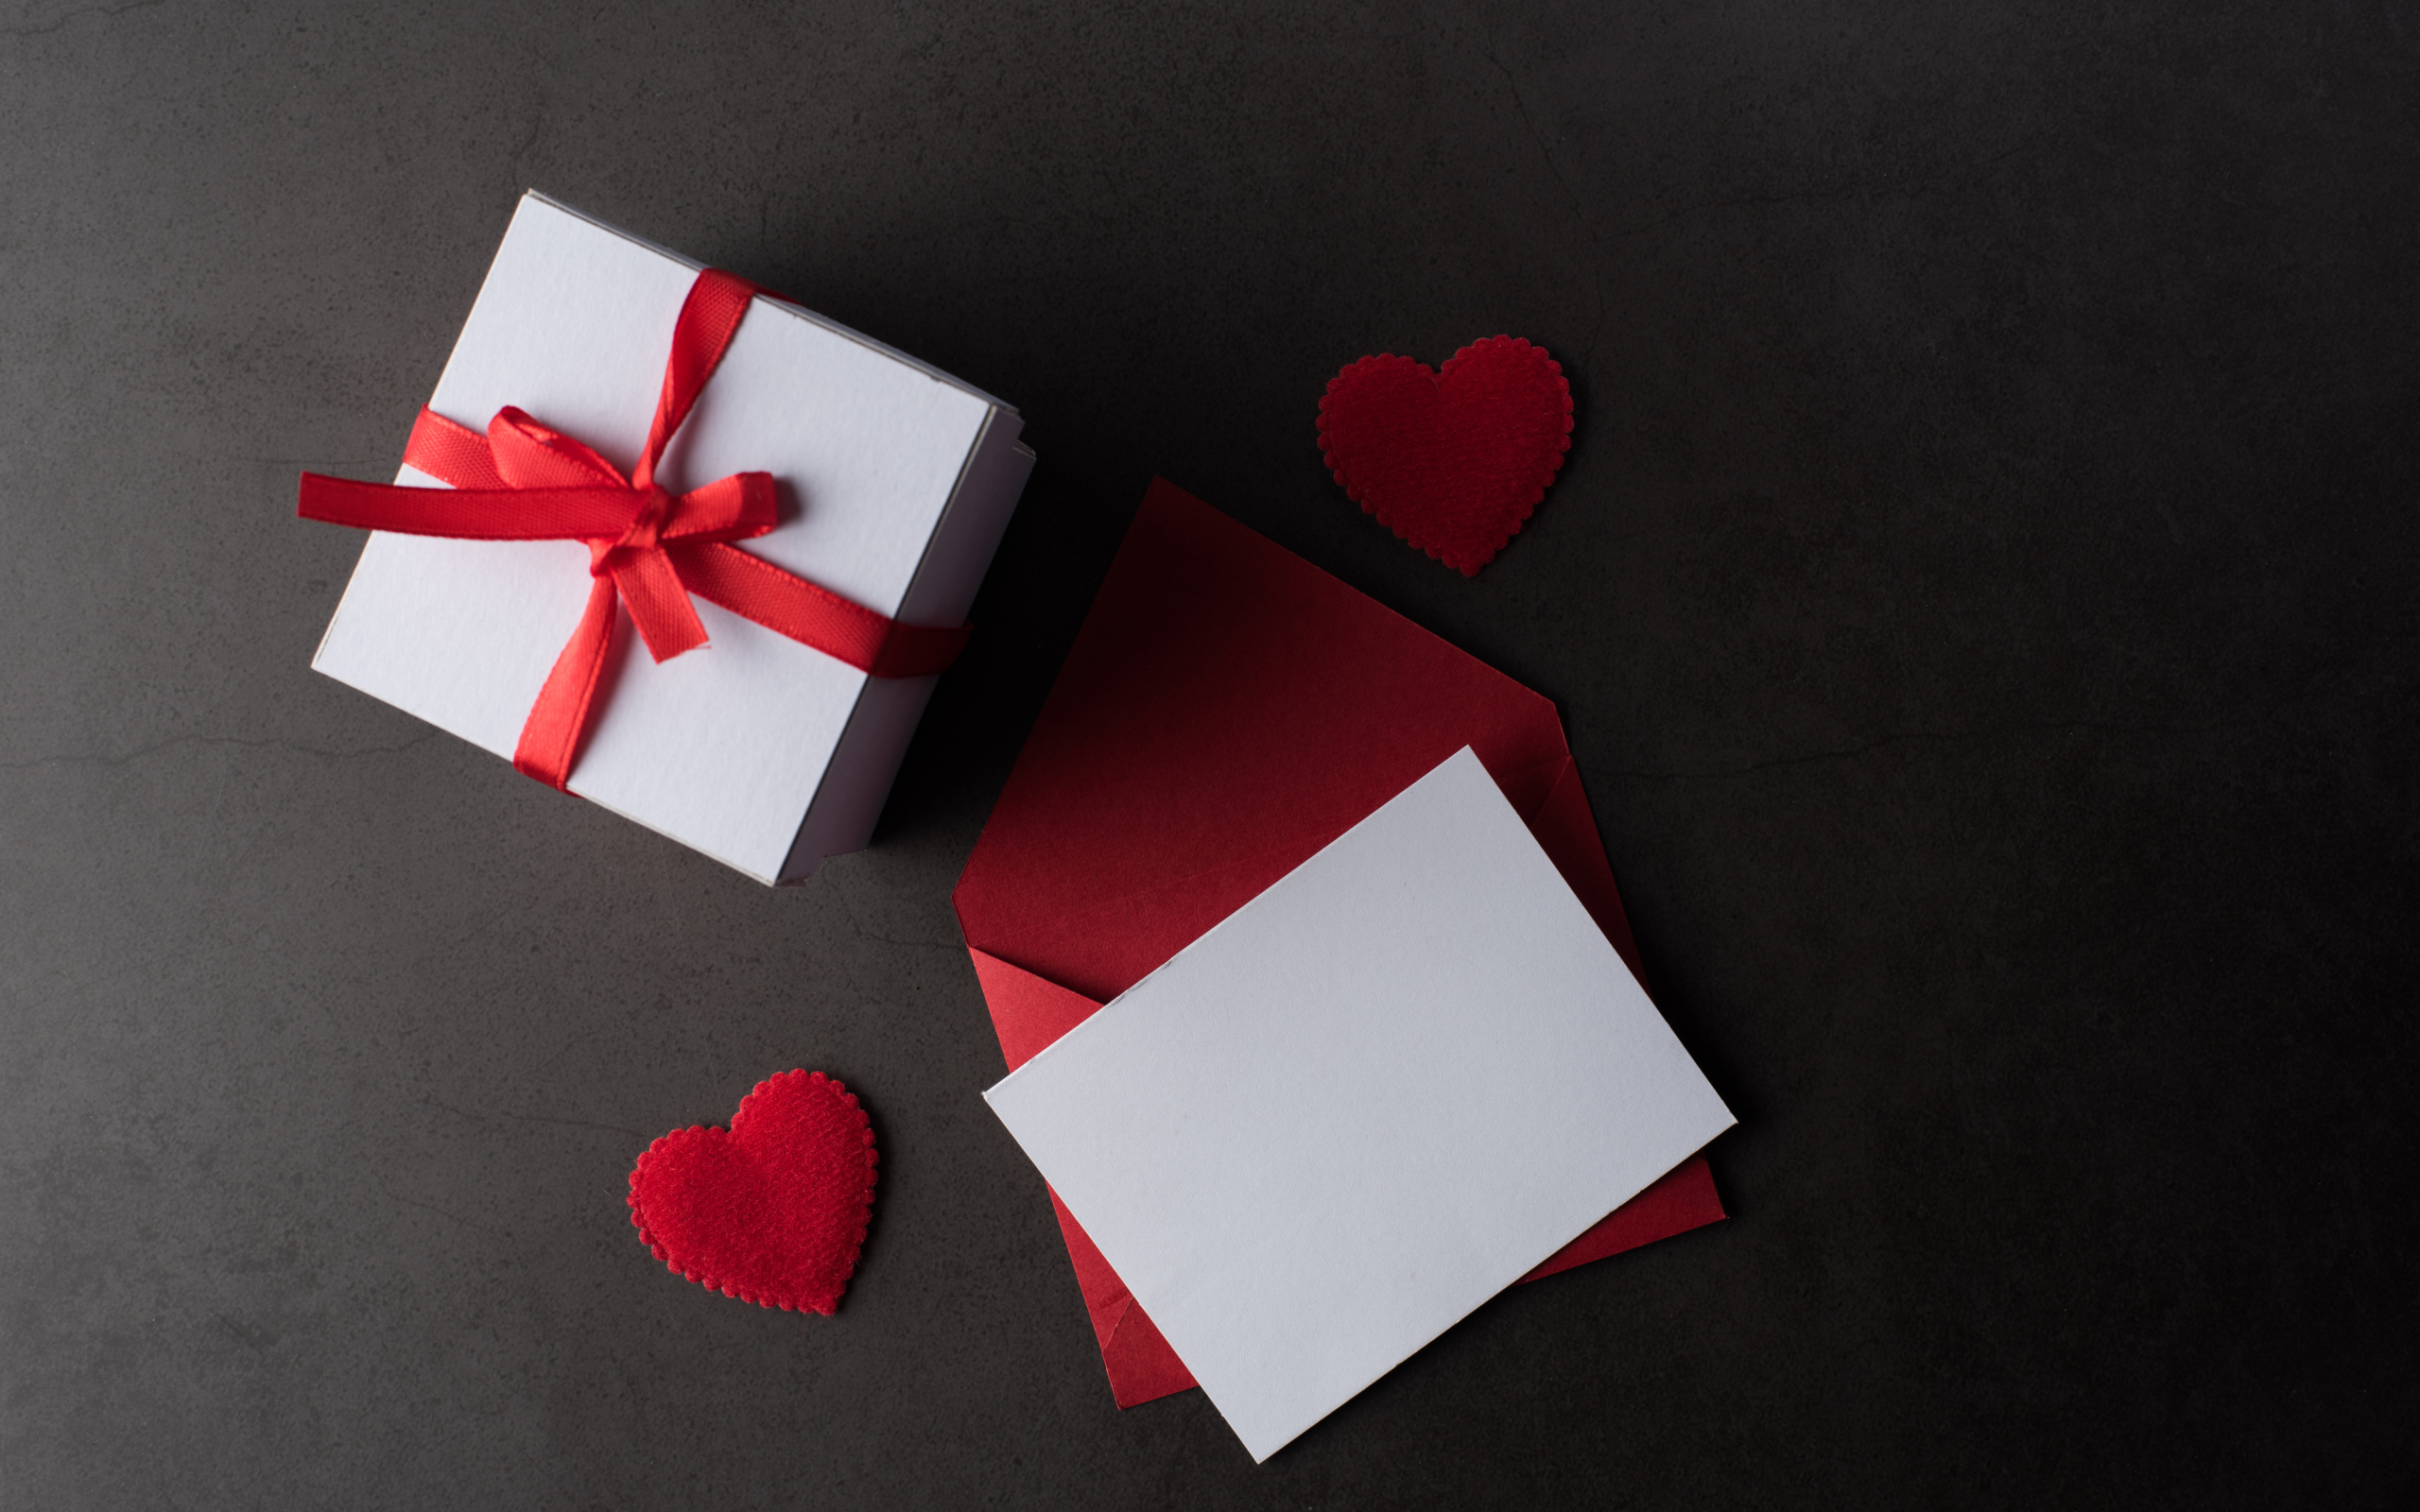 Envelope and gift on a gray table with red hearts.